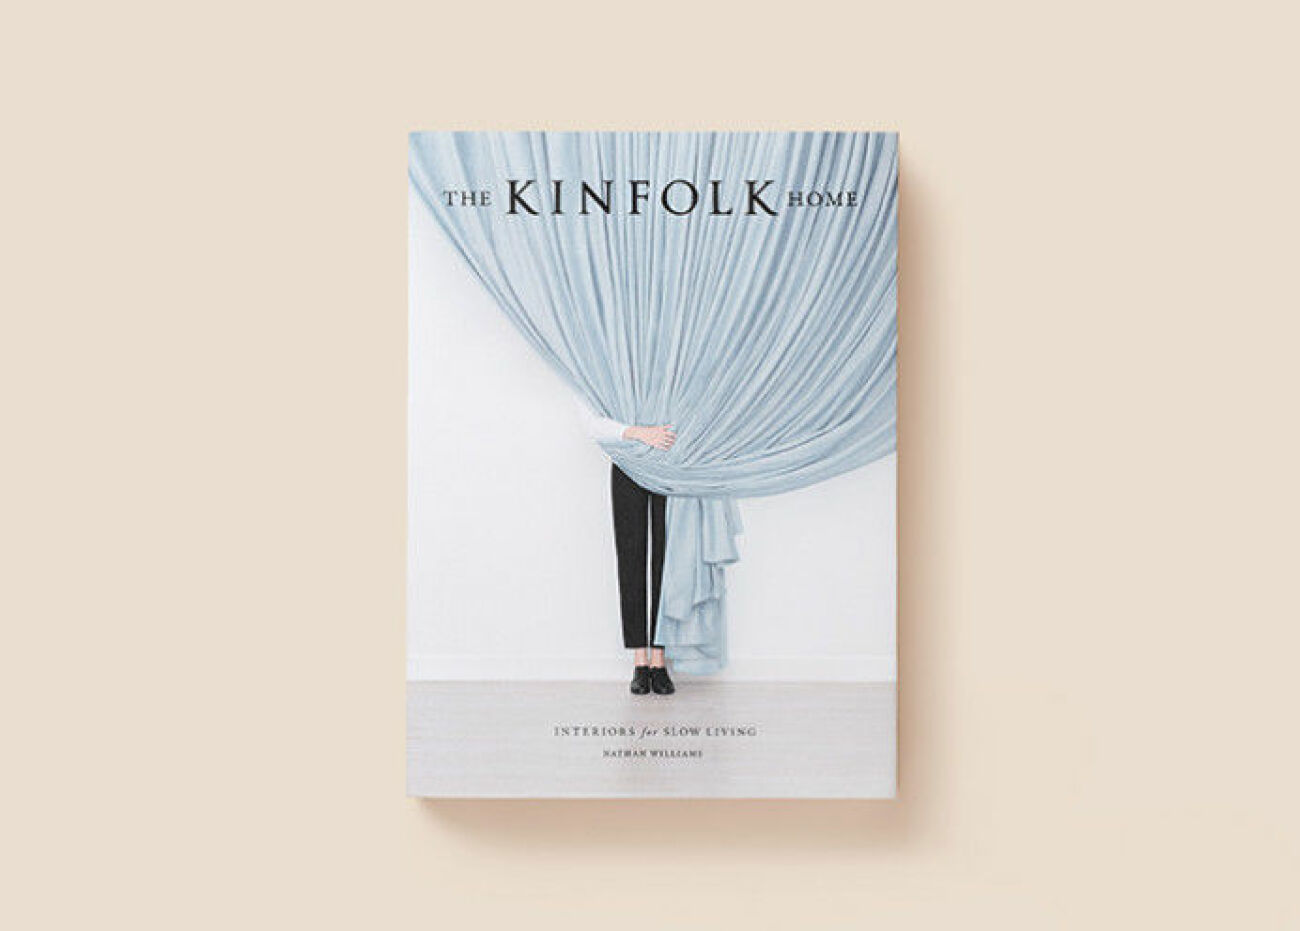 The Kinfolk Home – Interiors for Slow Living